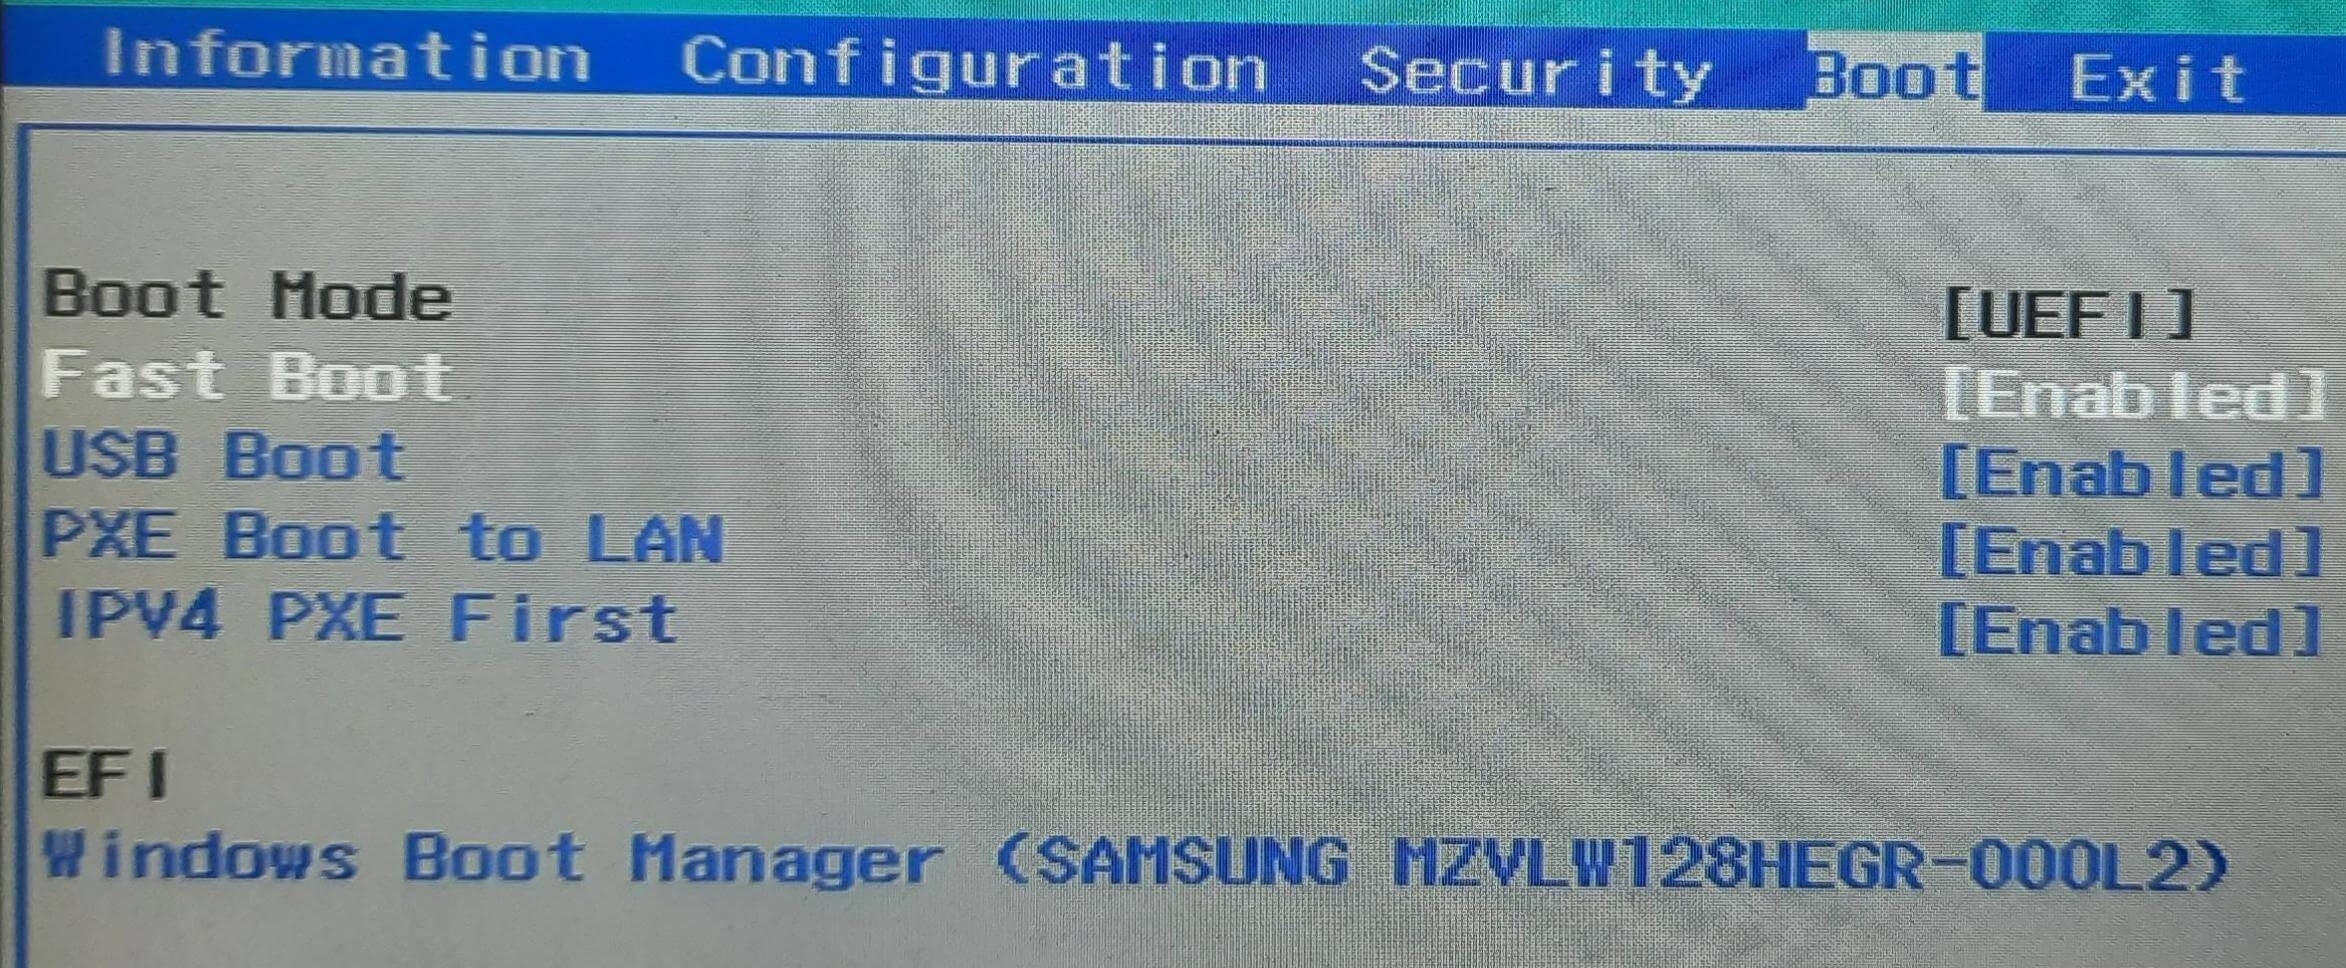 check whether the secure boot is enabled